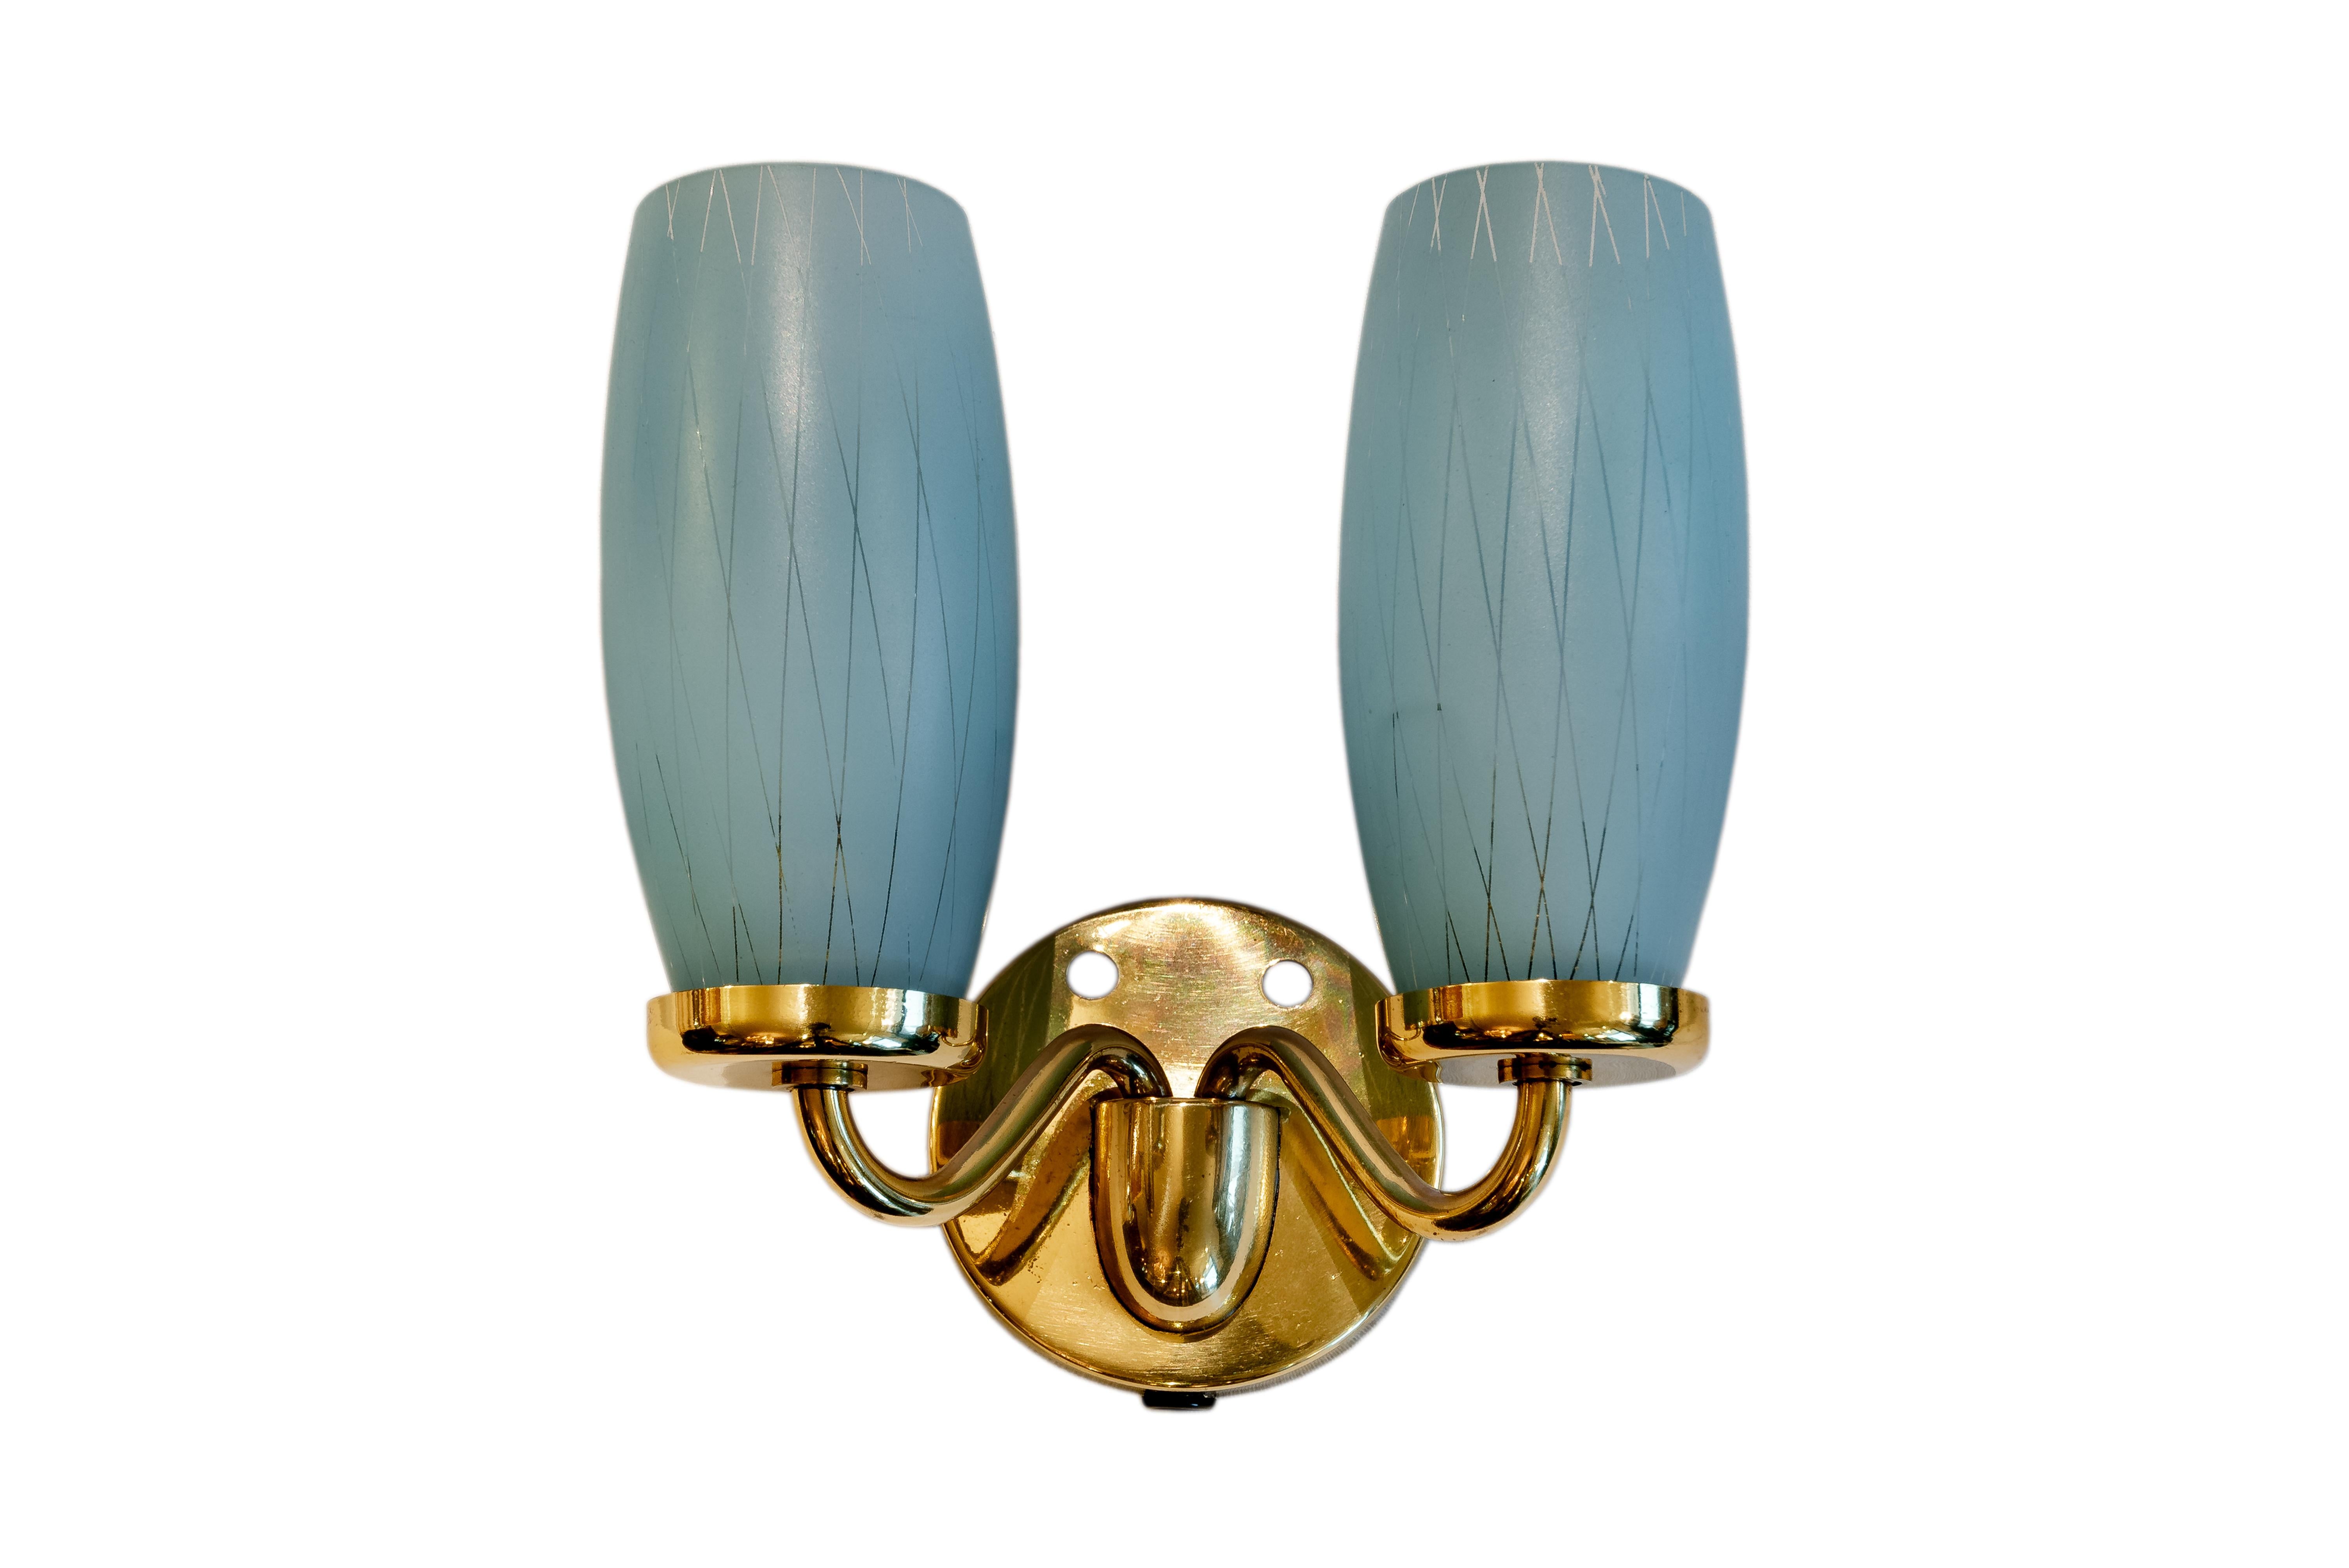 Pair of Mid-Century Modern Stilnovo style brass, blue and pink glass wall sconce, 1950
romantic Mid-Century Modern Stilnovo style pair of brass, blue and pink painted glass wall light sconce from the 1950s.

Photos by João Boullosa - Porto /